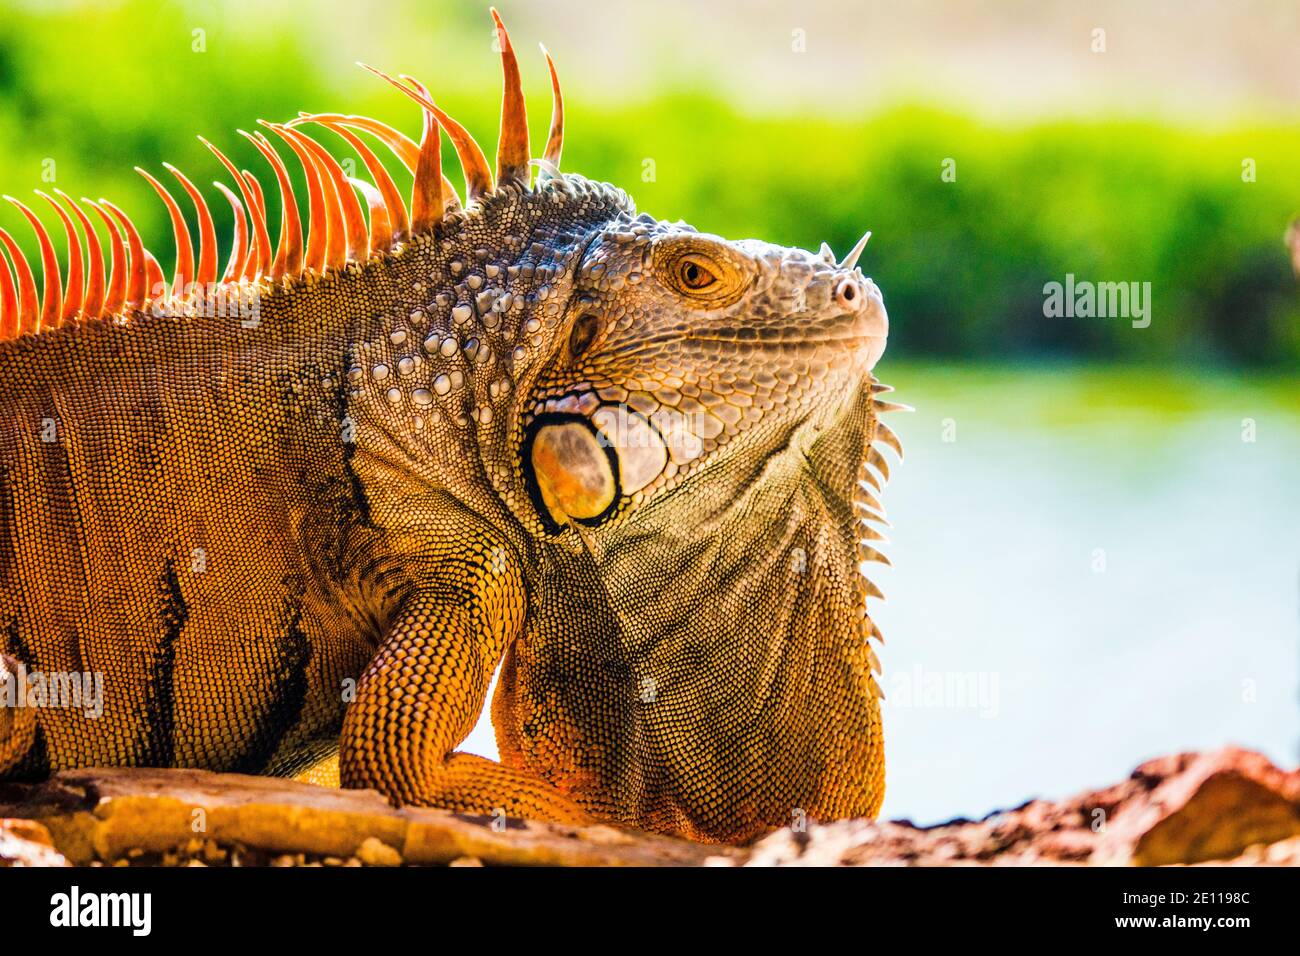 Closeup of an orange iguana sunning itself in a gun port of the Civil War Fort Zachary Taylor to the mangrove lined moat in Key West, the Florida Keys Stock Photo